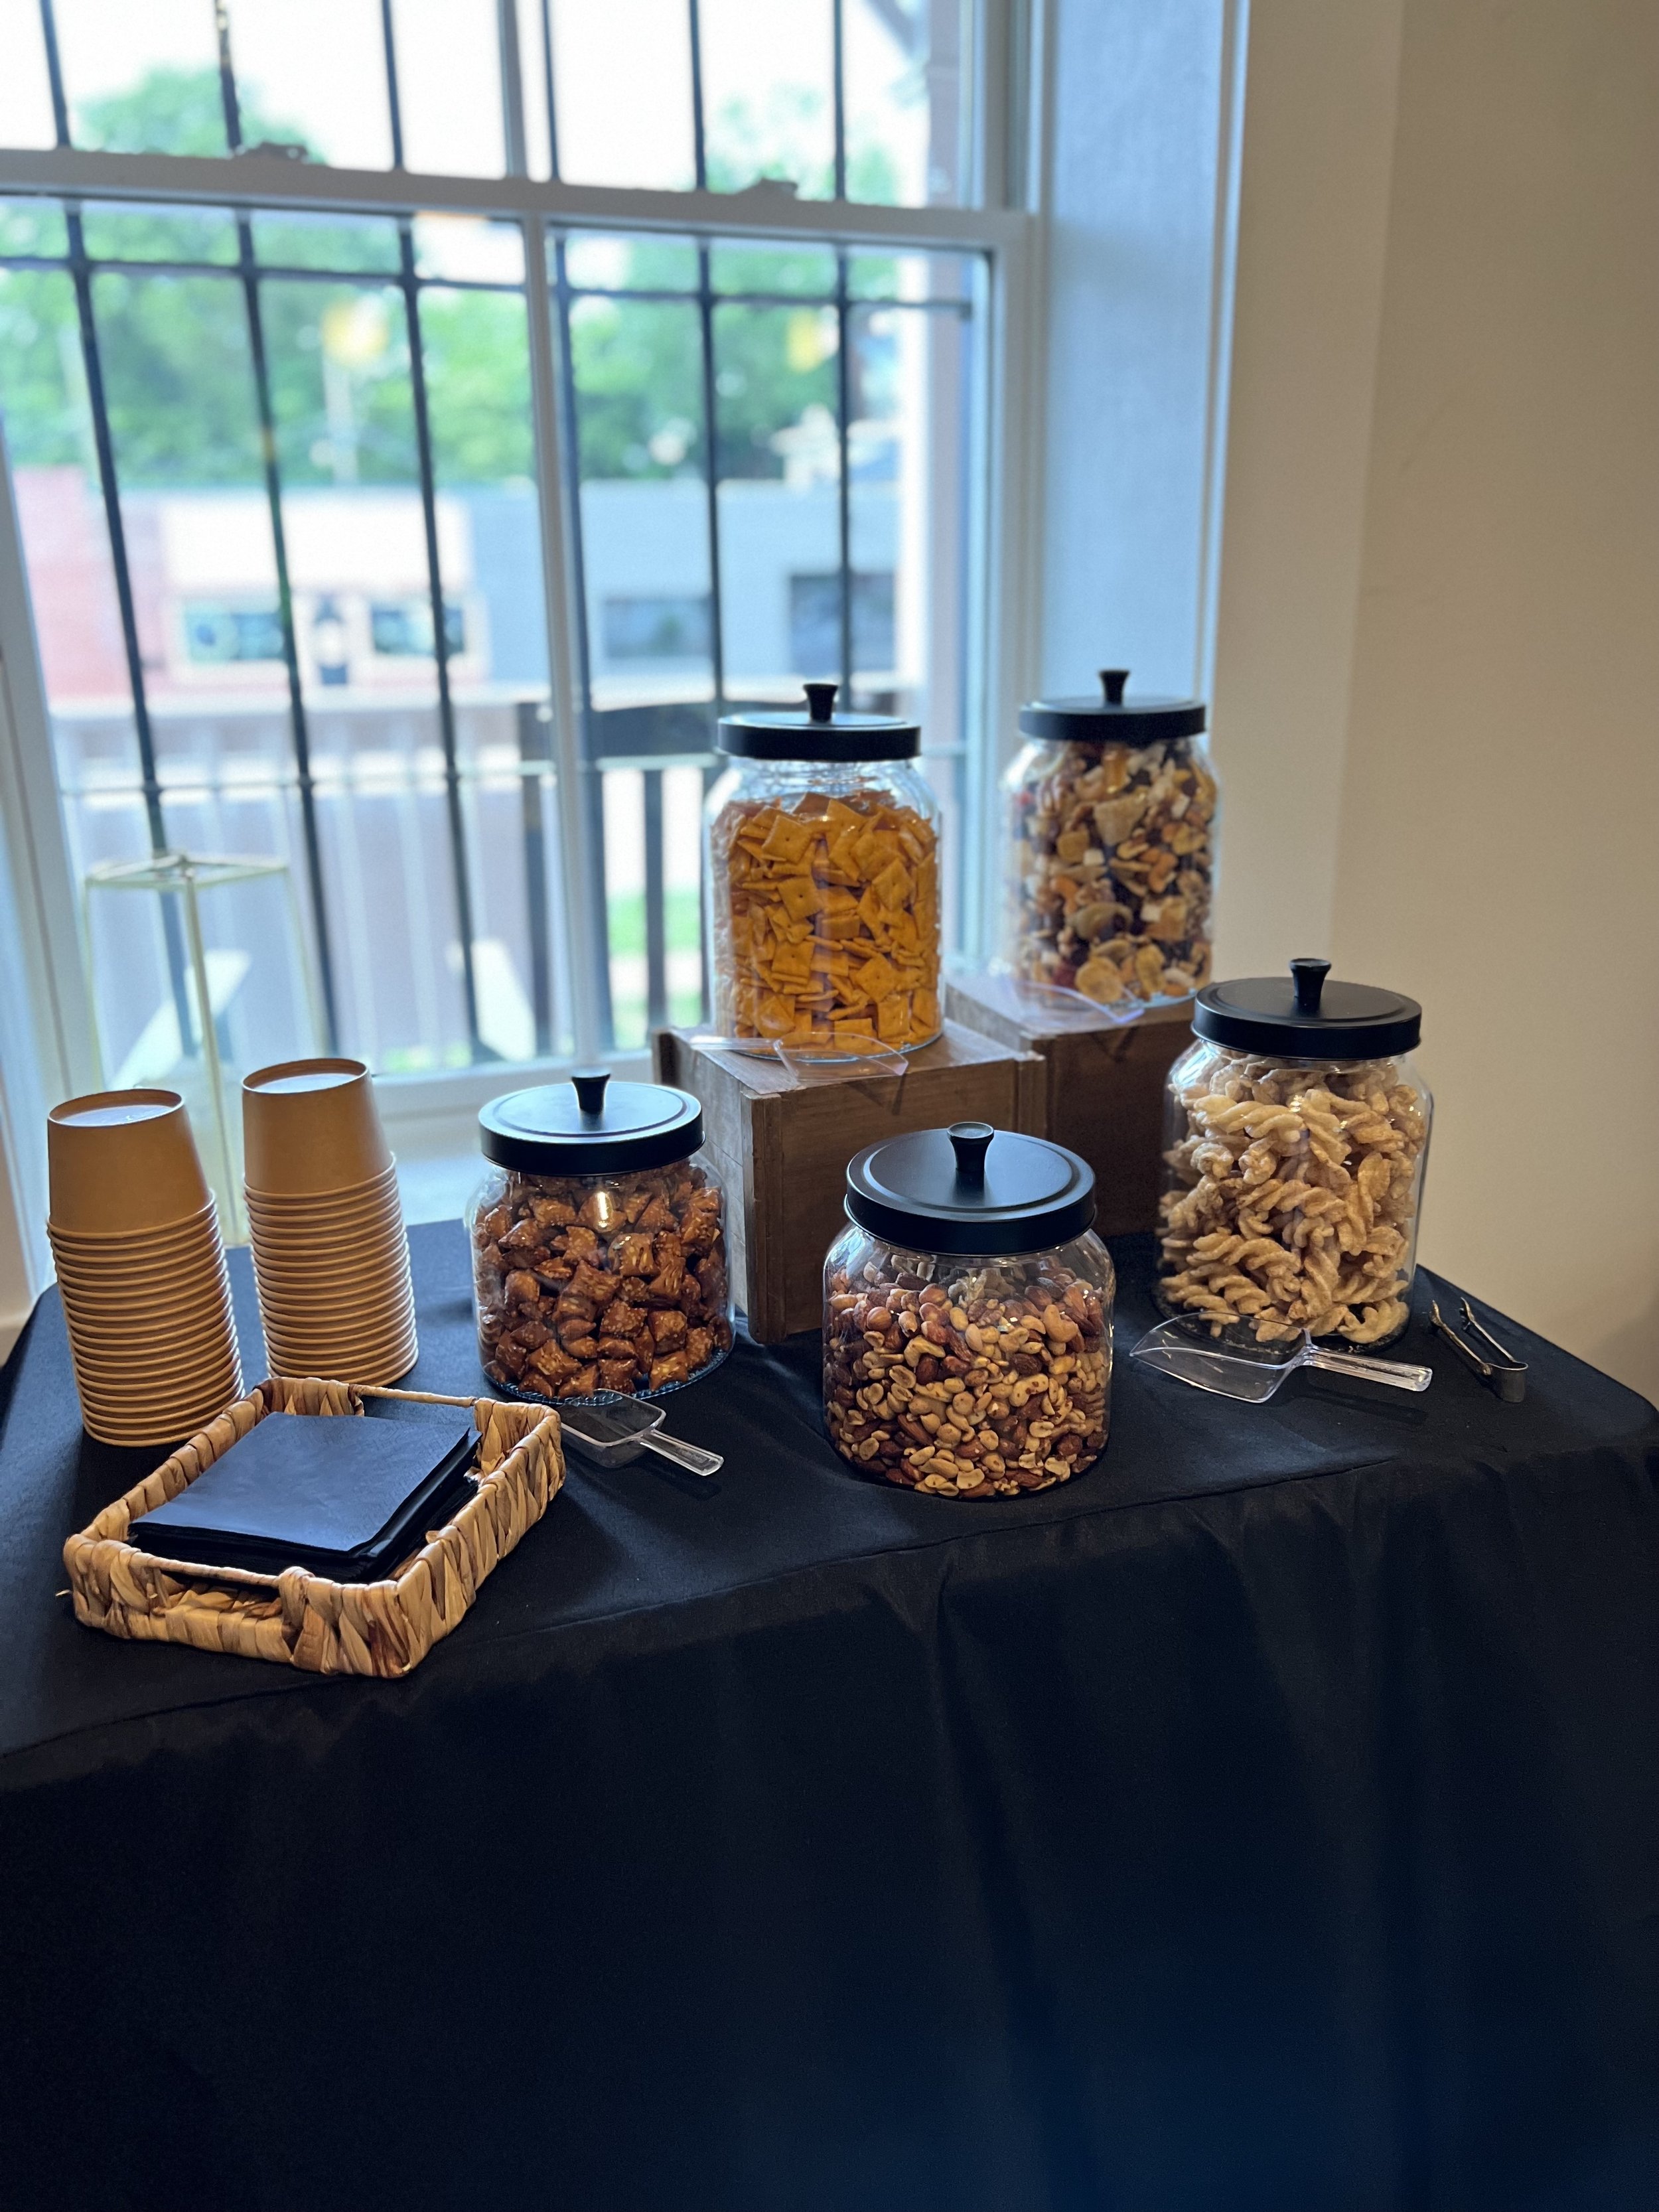 The Historic Dallas Jail Engagement Party Gaston County Event Venue Snack Bar.jpg